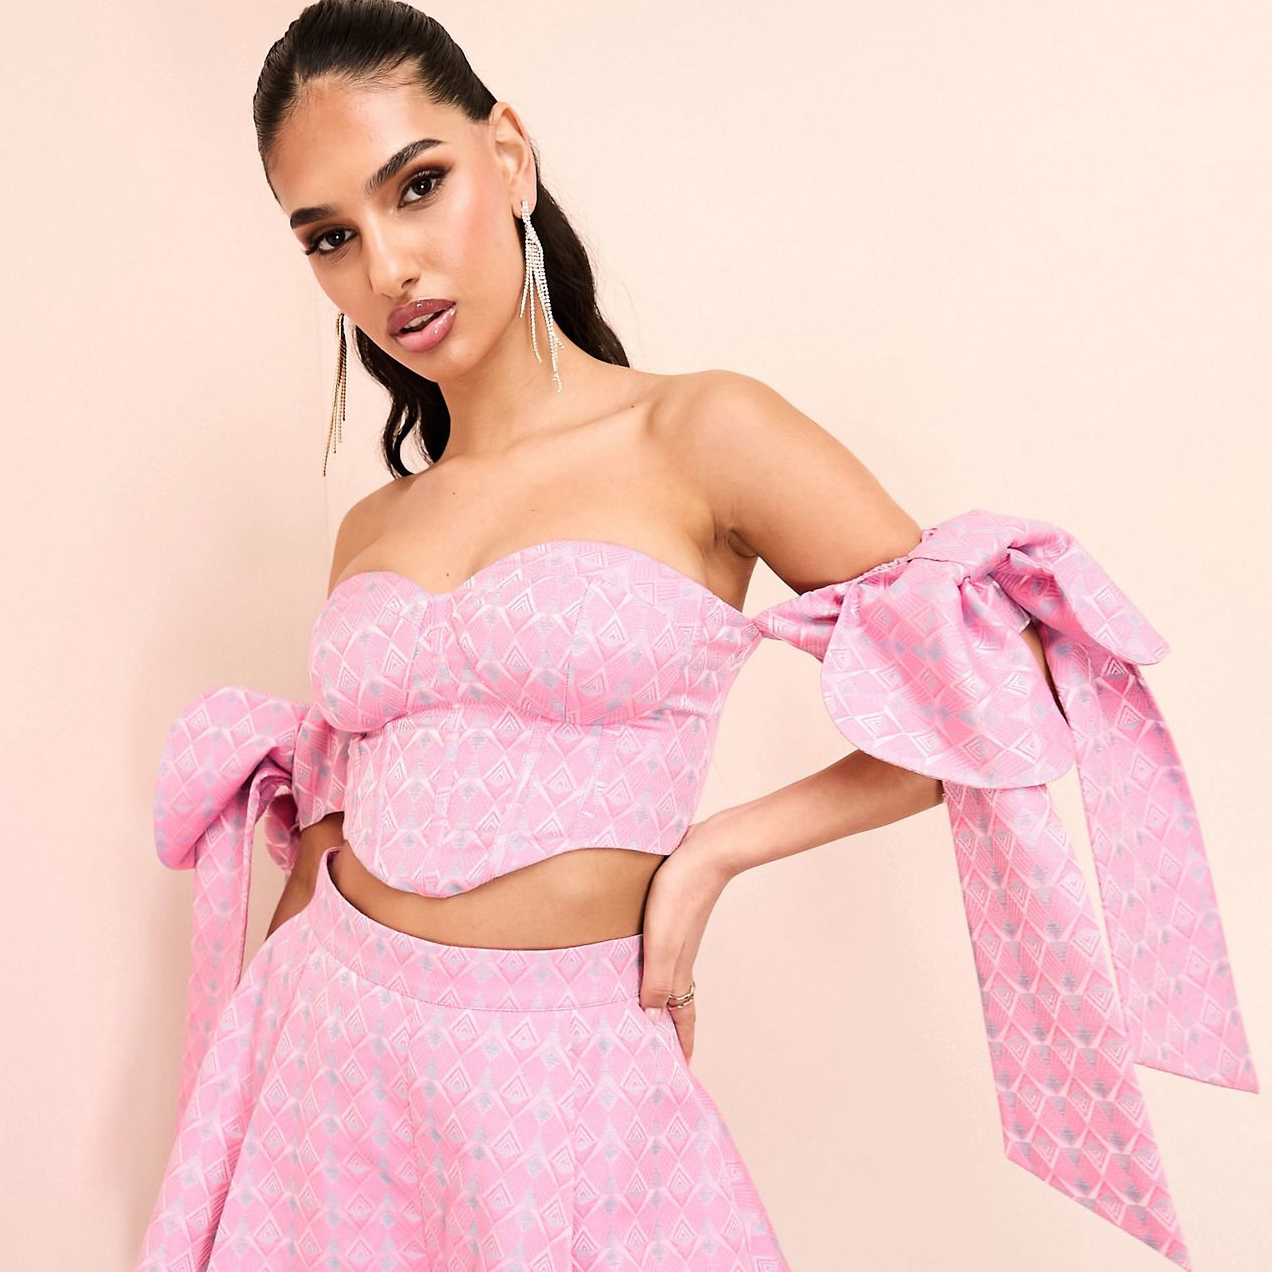 Топ Asos Luxe Print Jacquard Co-ord Bandeau Corsetted With Bow Tie Sleeves, розовый топ asos luxe co ord jacquard off shoulder crop in floral мультиколор